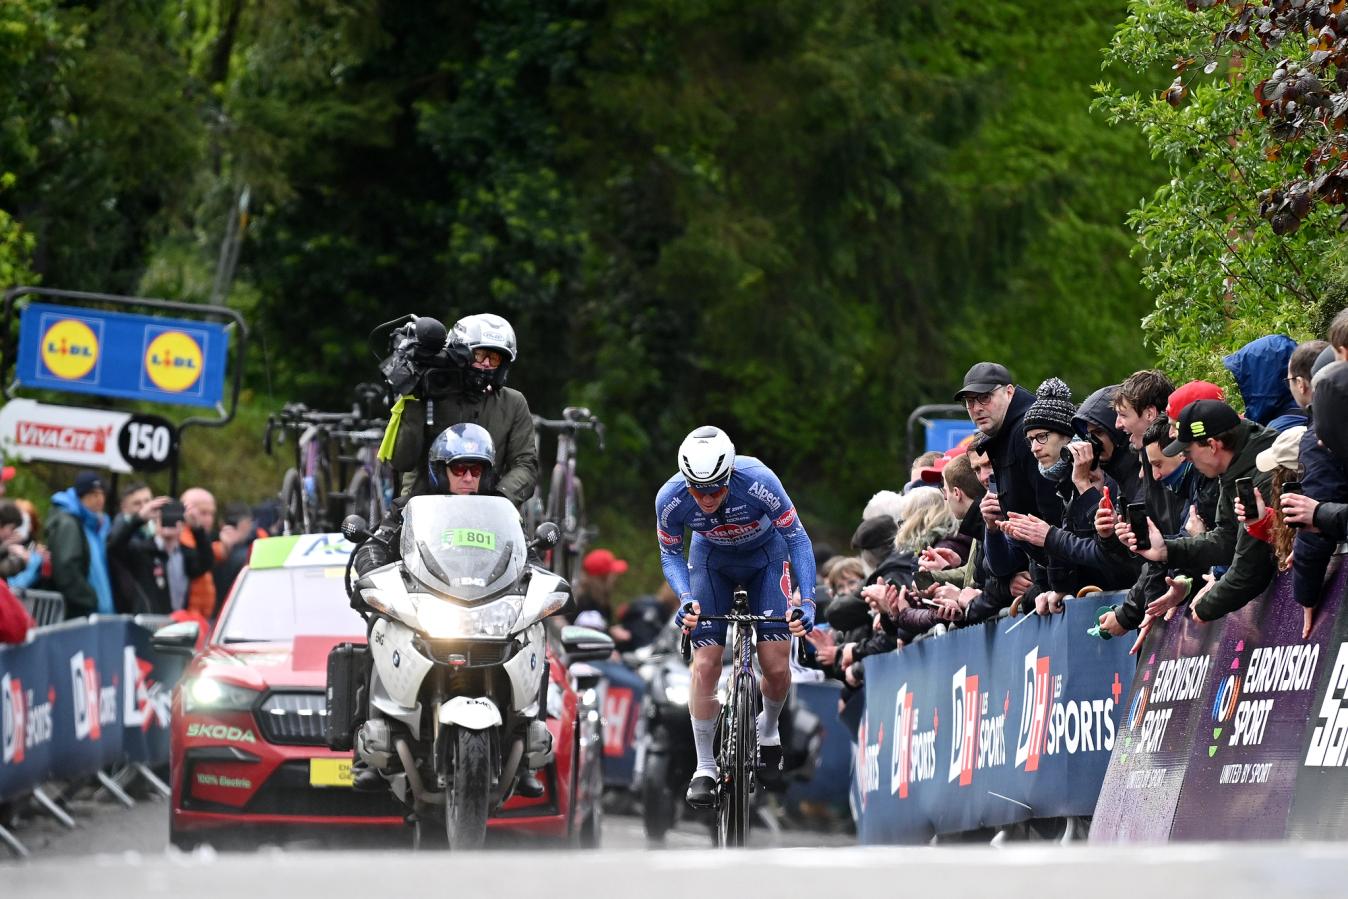 Søren Kragh Andersen produced the day's most valiant ride, attacking alone with a little under 60km to the finish